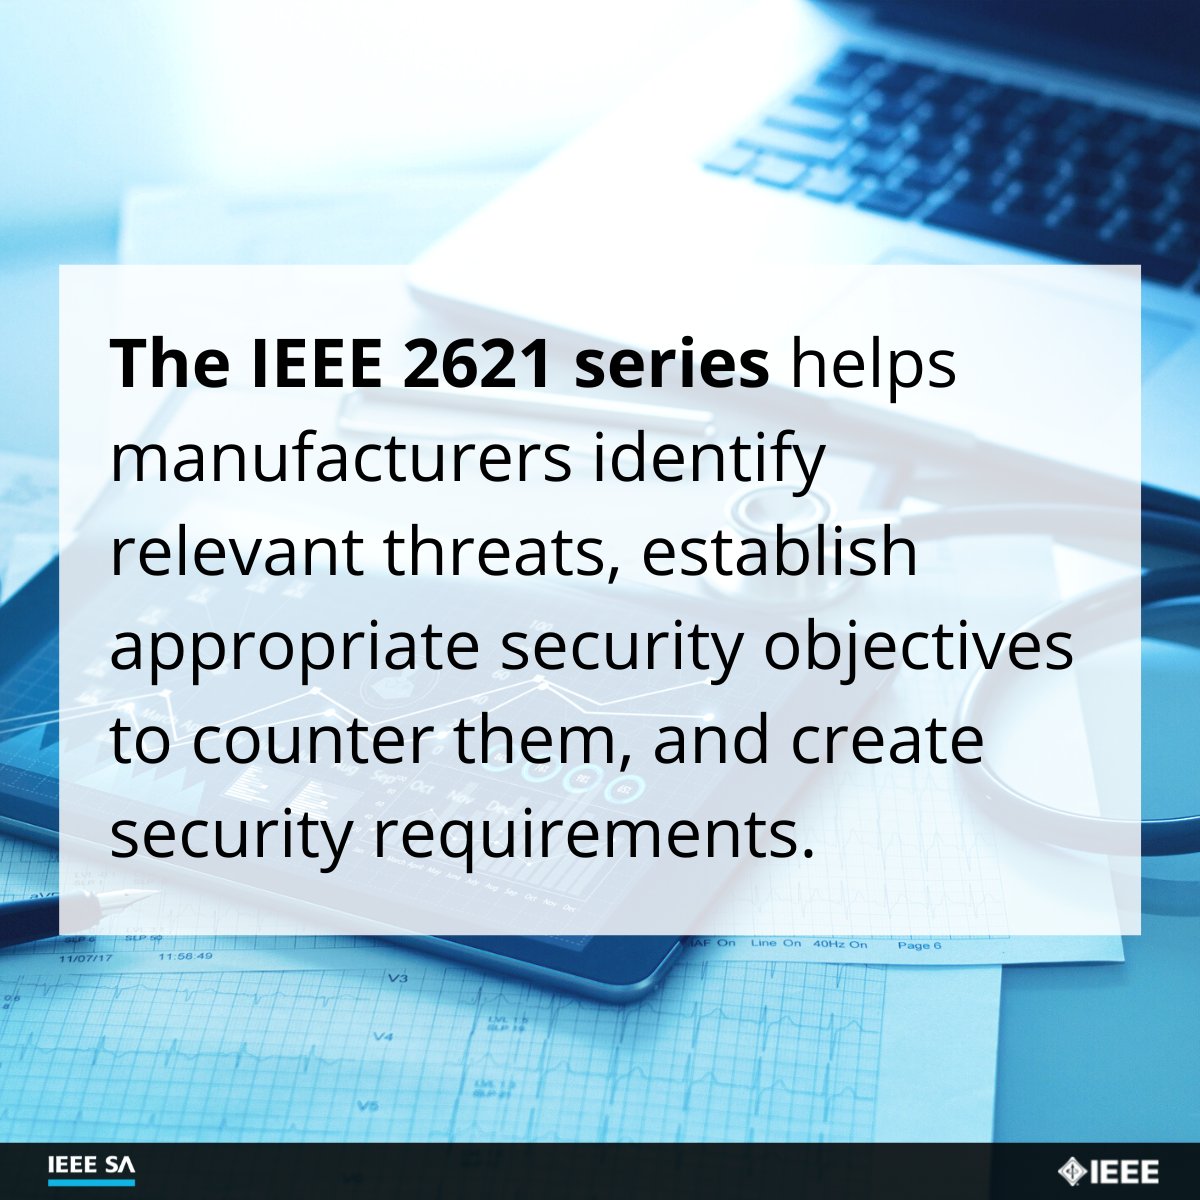 A growing number of people with diabetes are turning to wireless diabetes devices to monitor and manage their condition. How can standards address the cybersecurity needs of connected diabetes devices? @IEEEembs @DiabetesTechSoc beyondstandards.ieee.org/addressing-the…